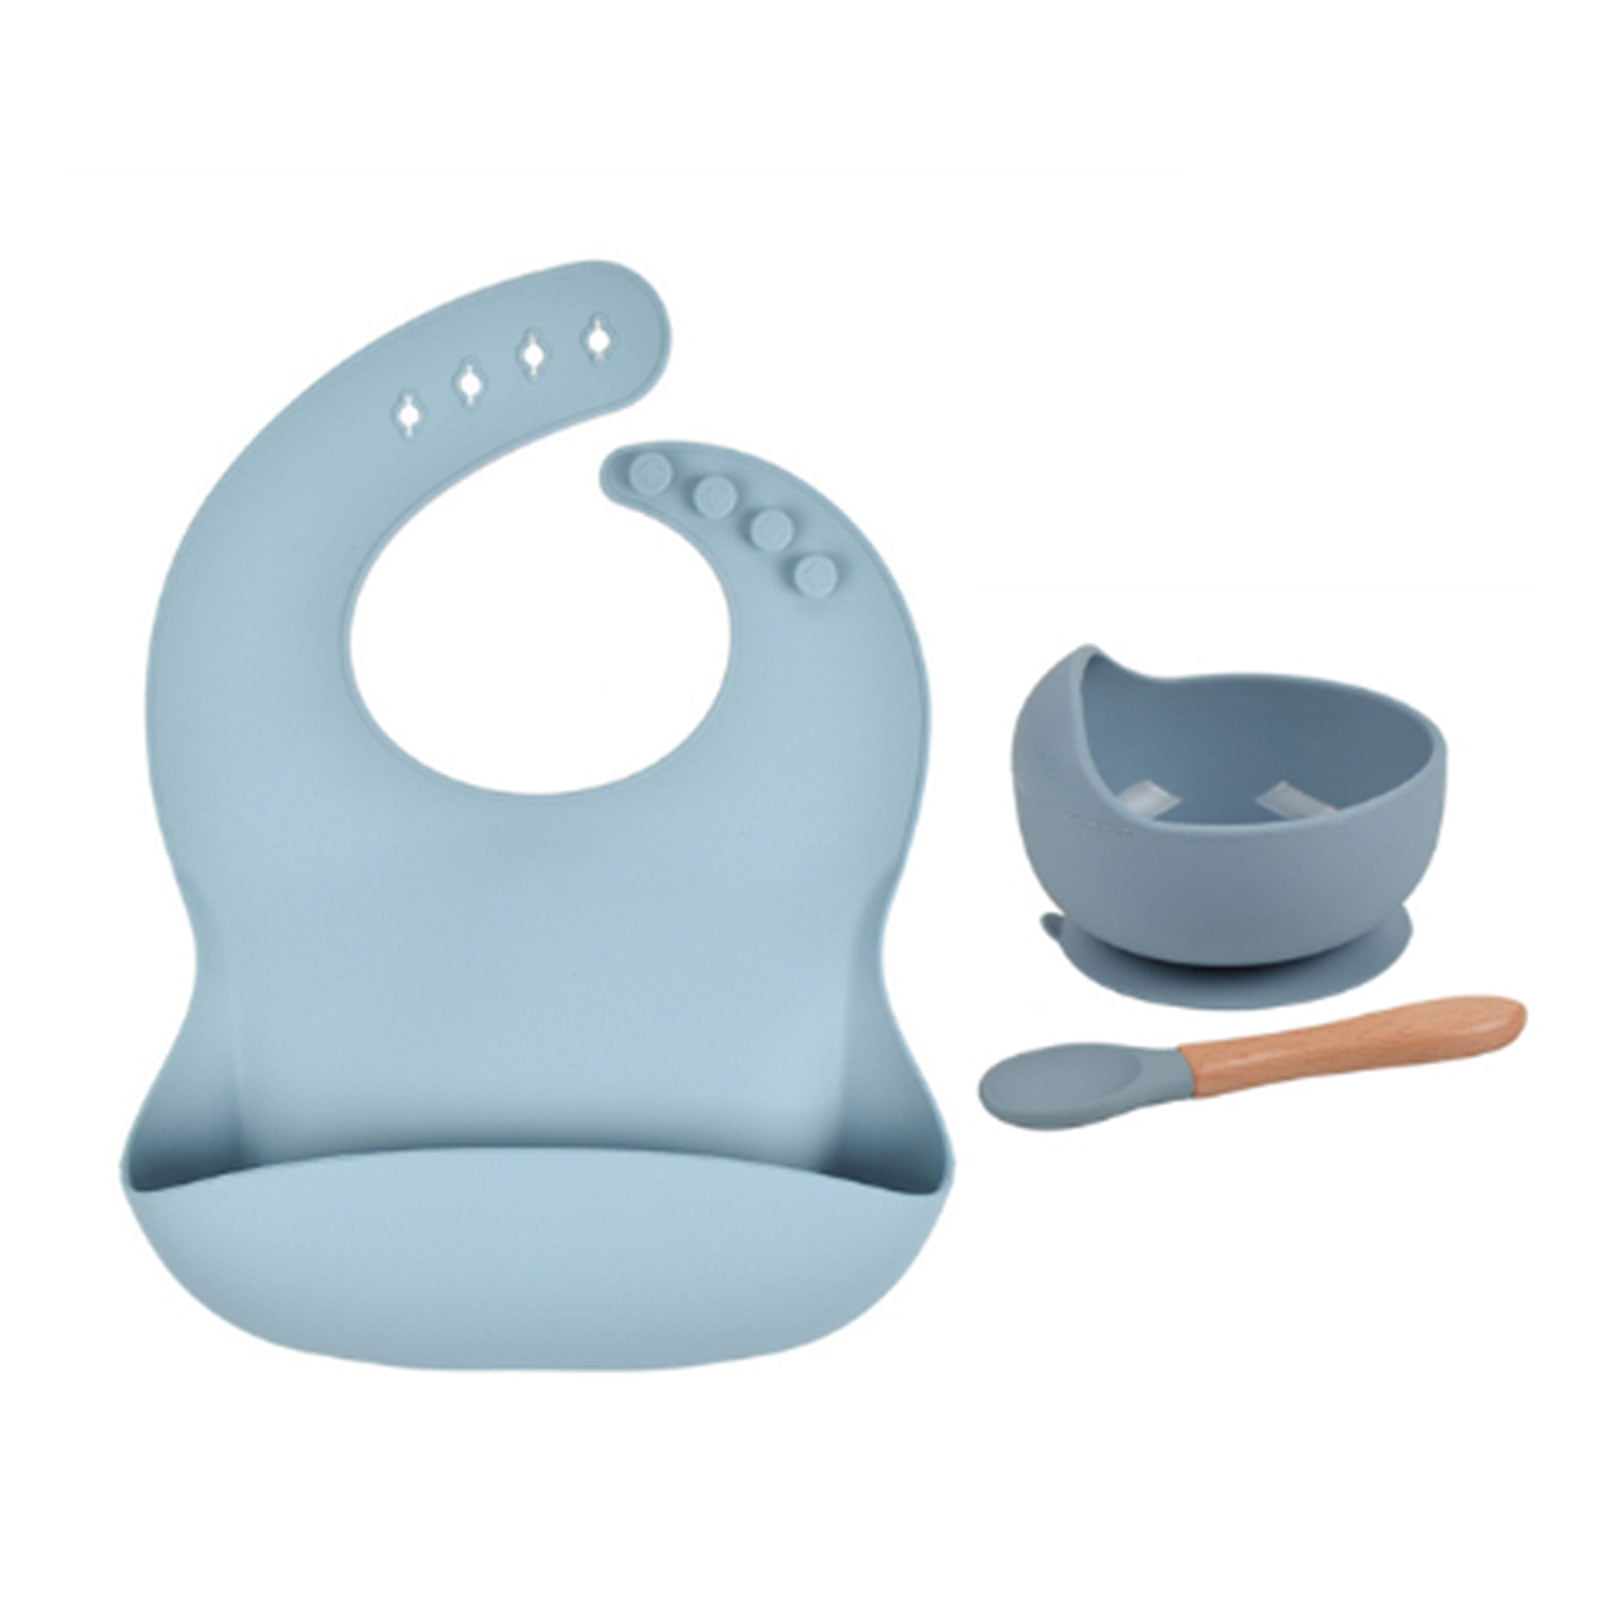 8pcs Baby Feeding Set Food-grade Silicone Baby Tableware Set with Suction Plate Suction Bowl Spoon Fork Drink Cup Adjustable Elephant Bibs BPA-Free